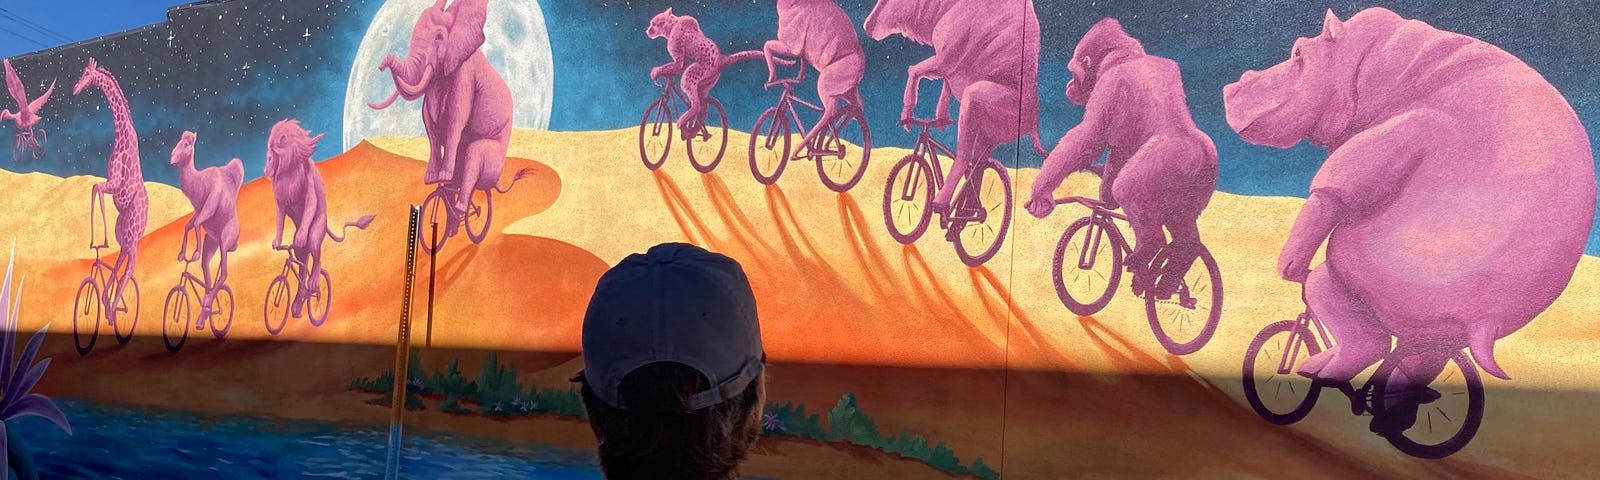 A man stands facing a colorful mural of purple animals riding bikes over sand dunes beneath a full moon and star-filled sky.